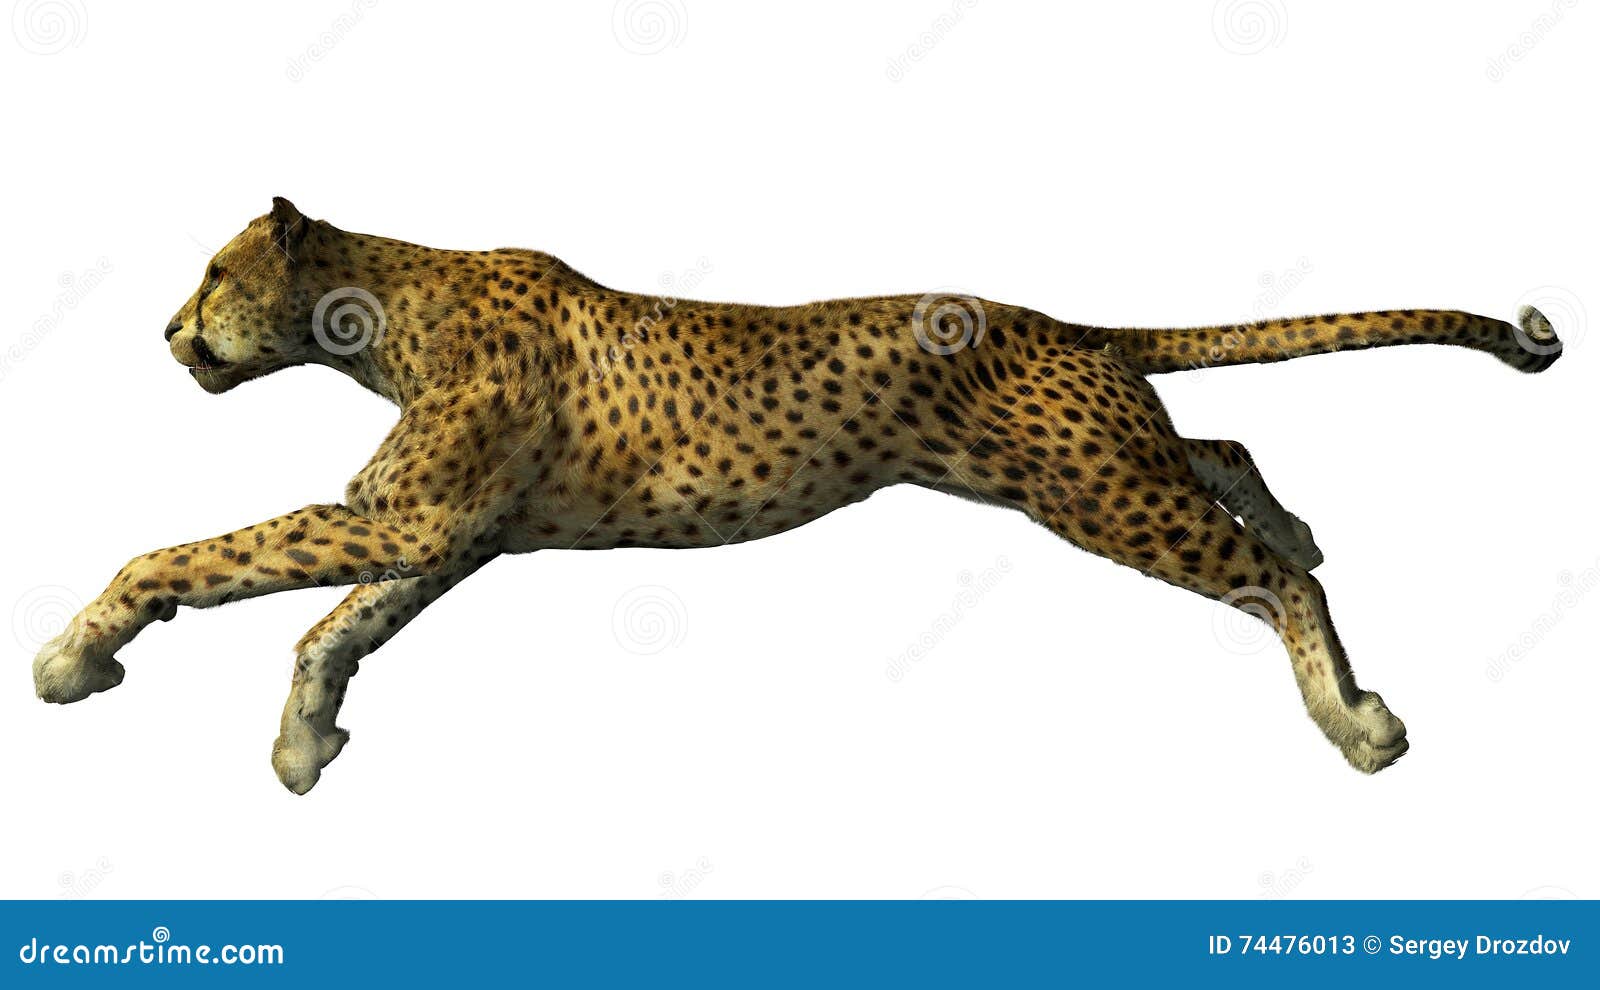 The image of a gepard stock illustration. Illustration of carnivore ...